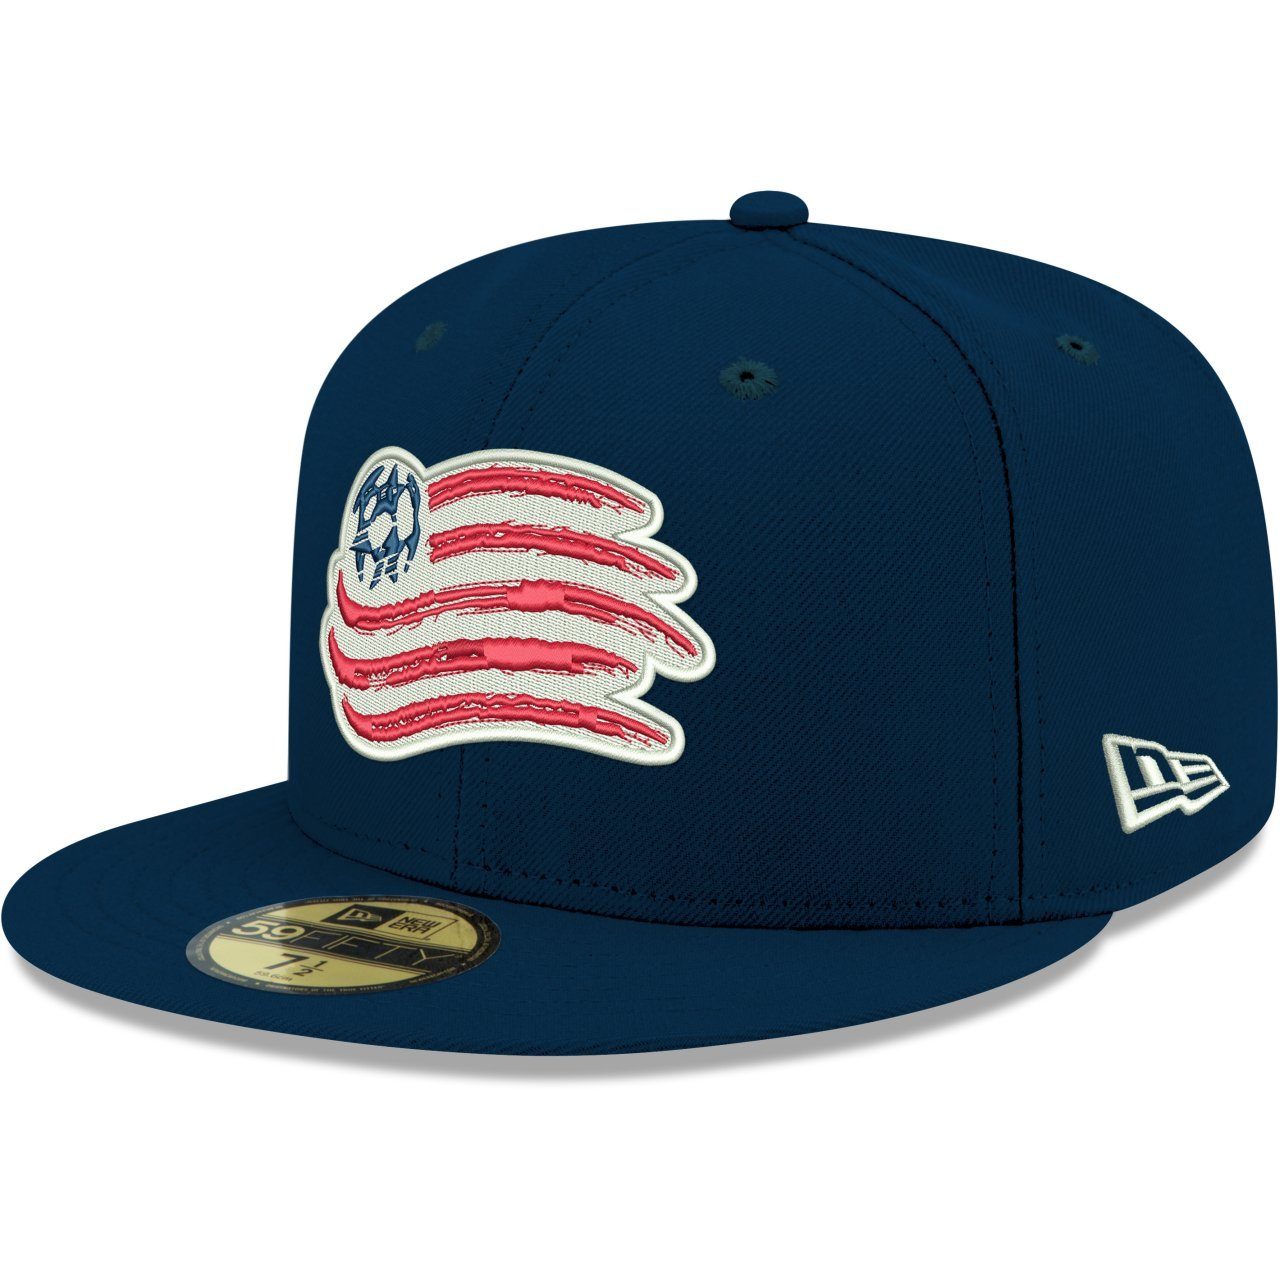 New Era Fitted Cap 59Fifty MLS New England Revolution